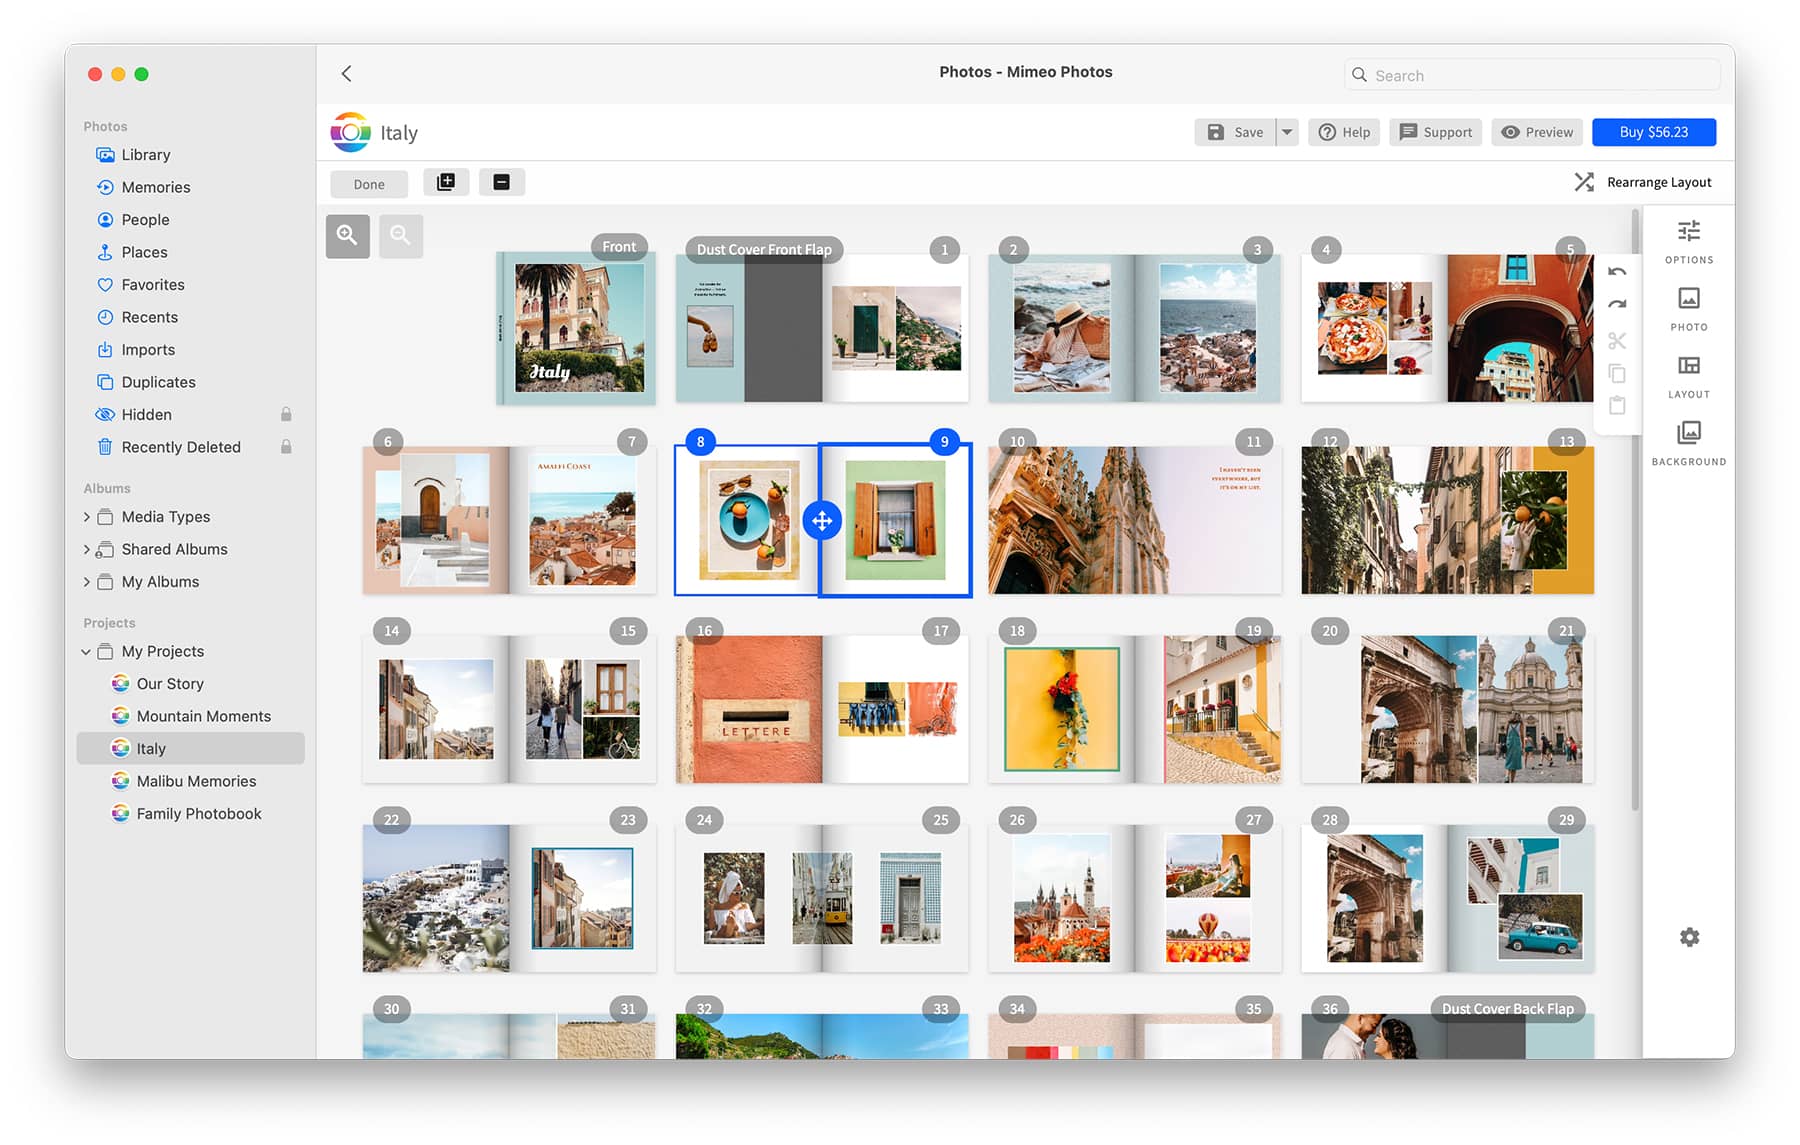 Project organization feature in Mimeo Photos for Mac